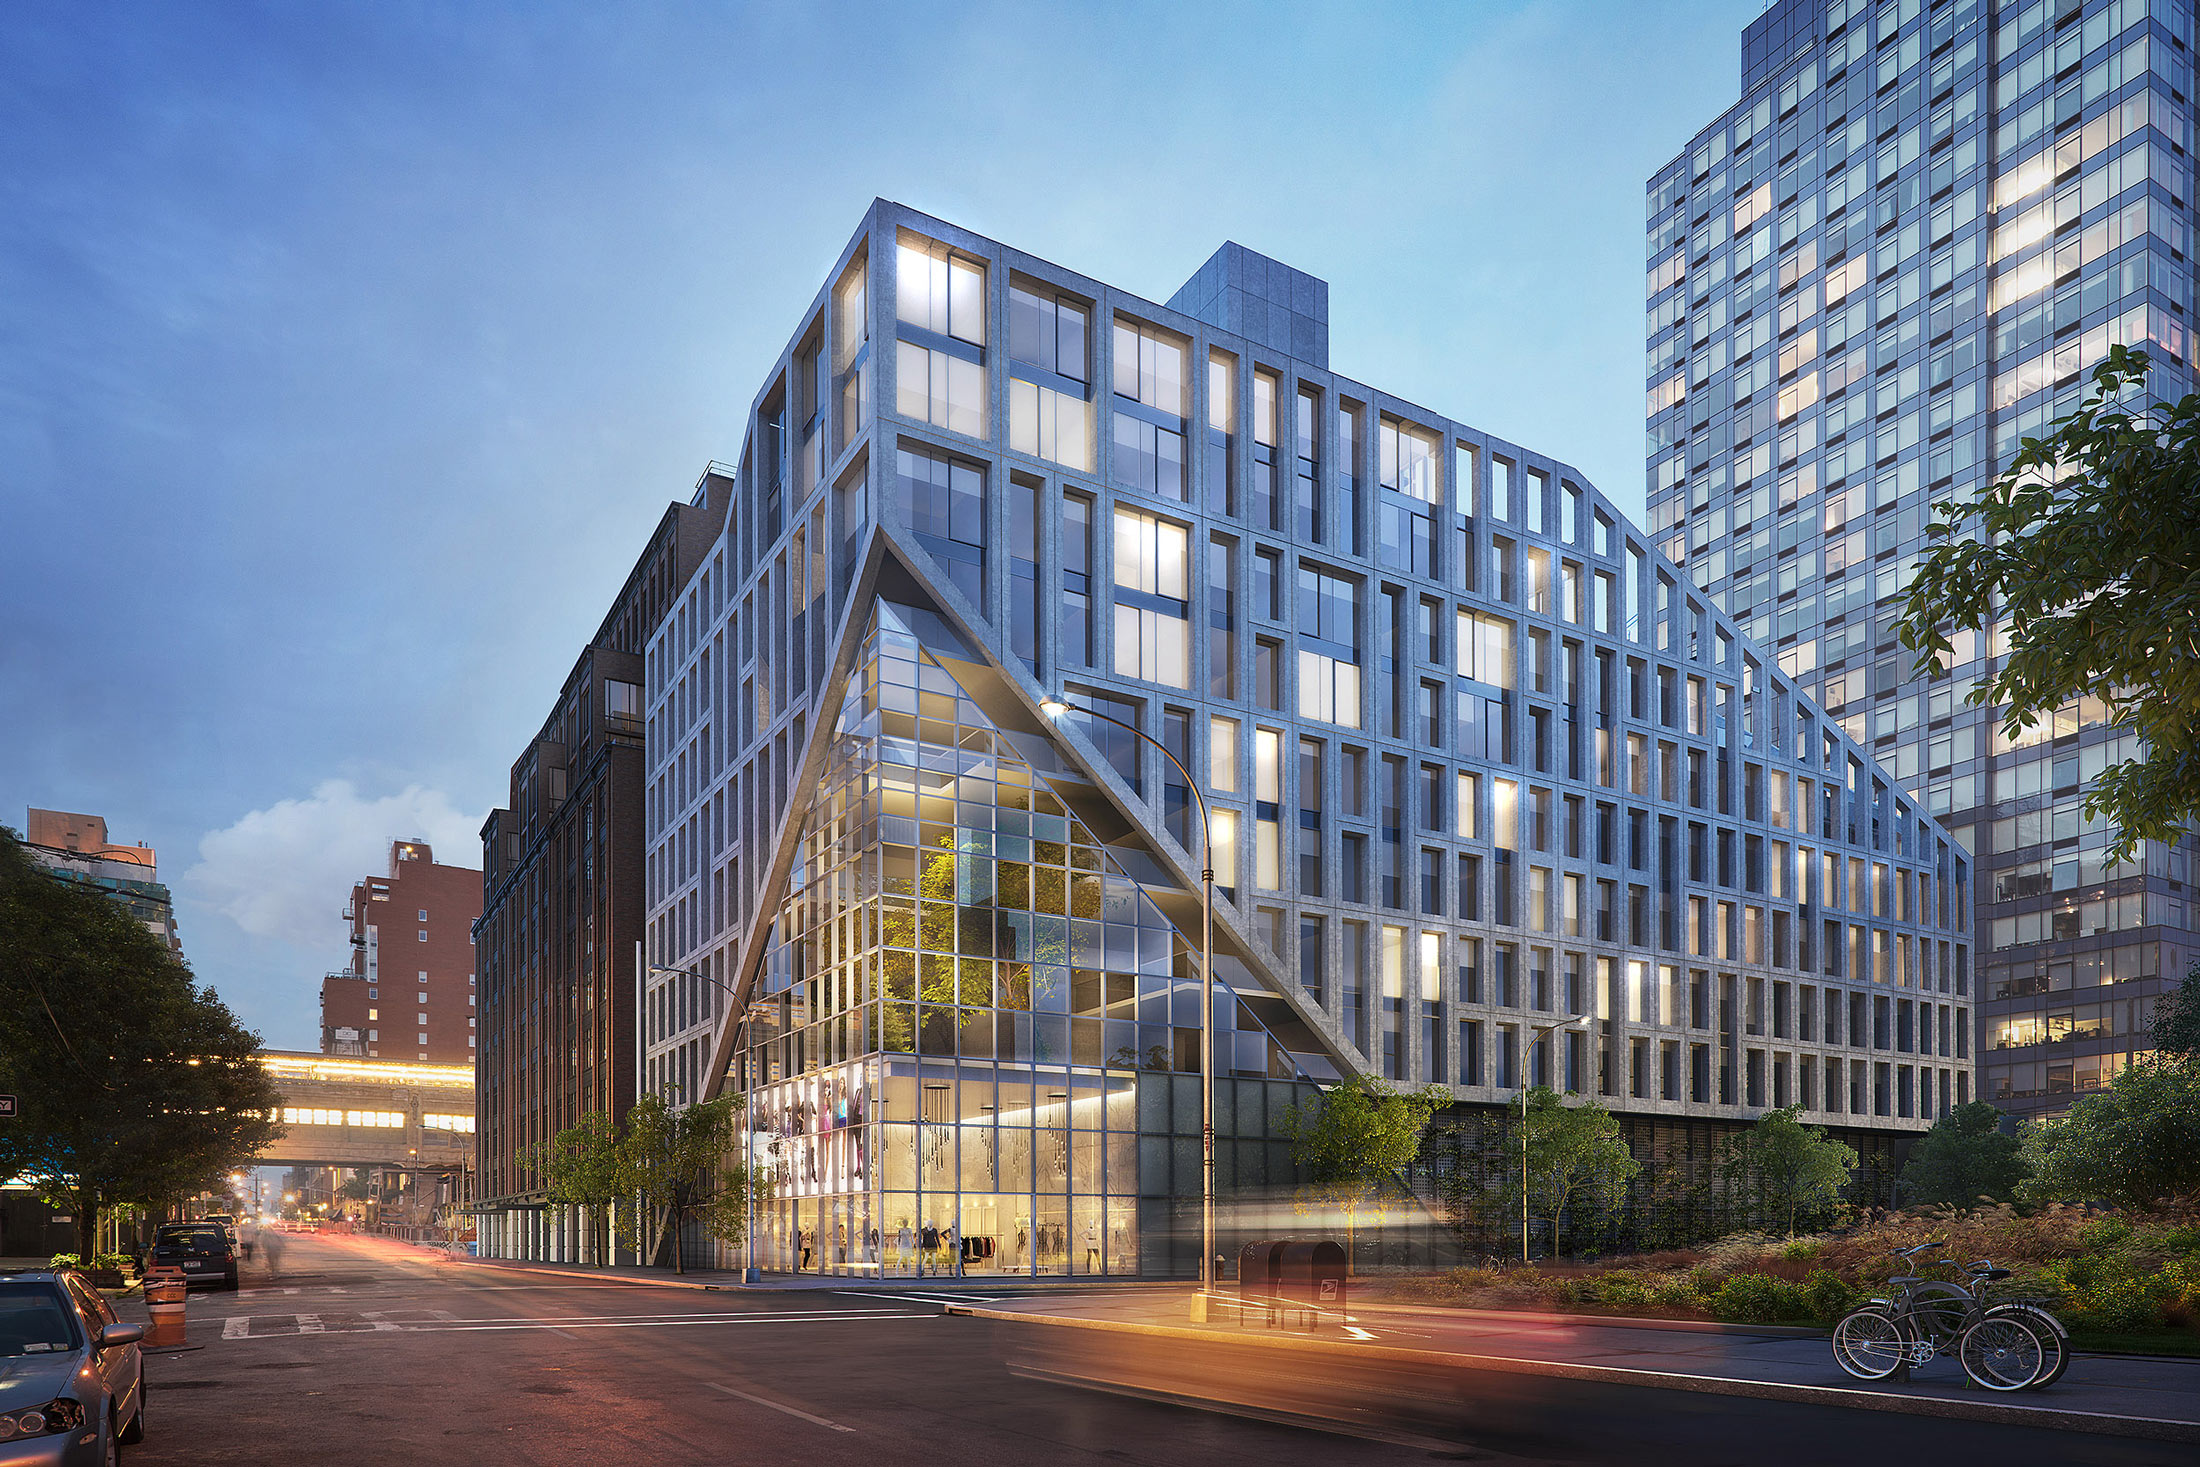 Architectural Rendering of the exterior of the Bevel Long Island City project located in Queens, New York